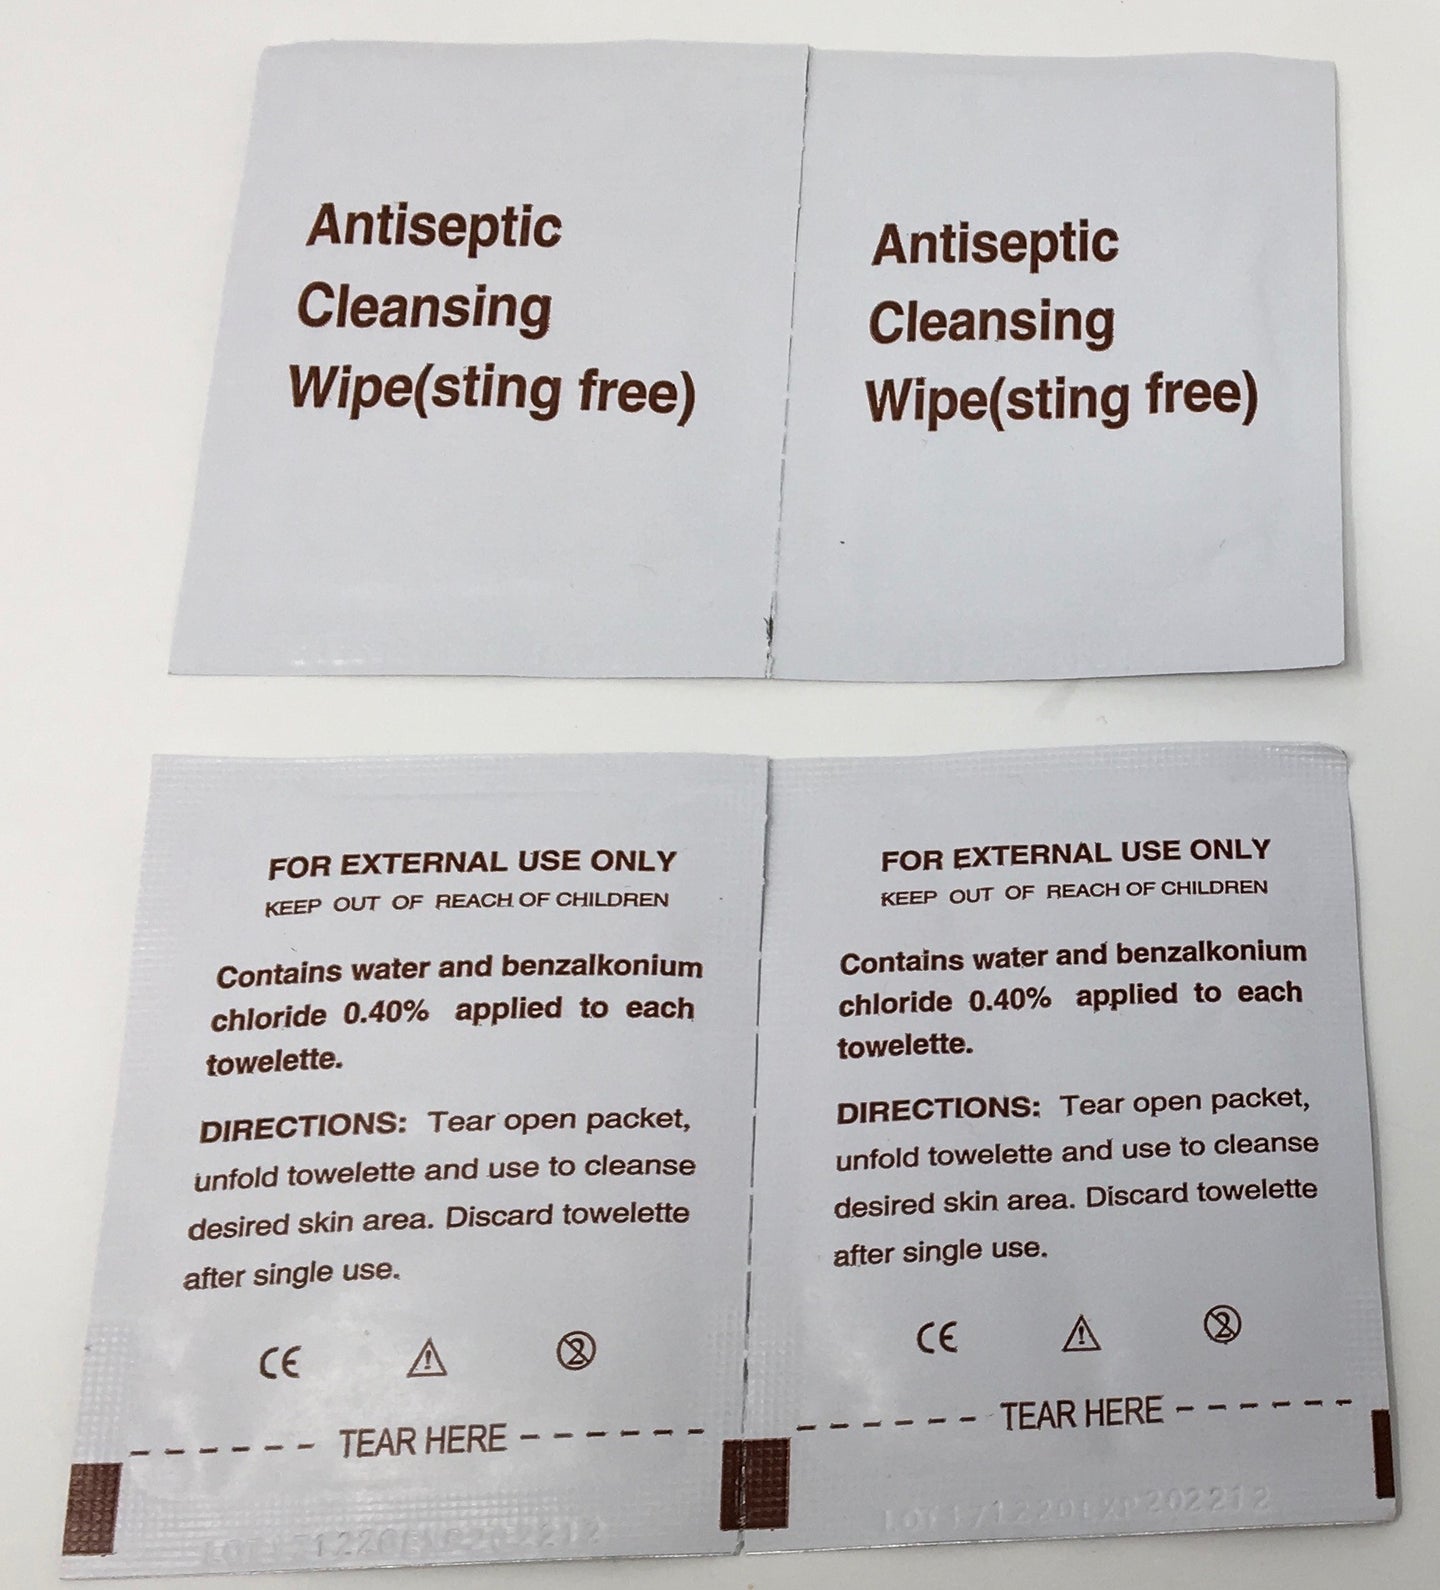 Antiseptic Cleansing Wipes - Don't Let Infection Dictate What You Do! Don't be troubled by infection when it is just so easy to help prevent! Our Antiseptic Cleansing Wipes clean wounds to help prevent infection! Cleans wound to help prevent Infection Sanitary single use packets Sting-Free! What You Get: Pack of 36 single use packets